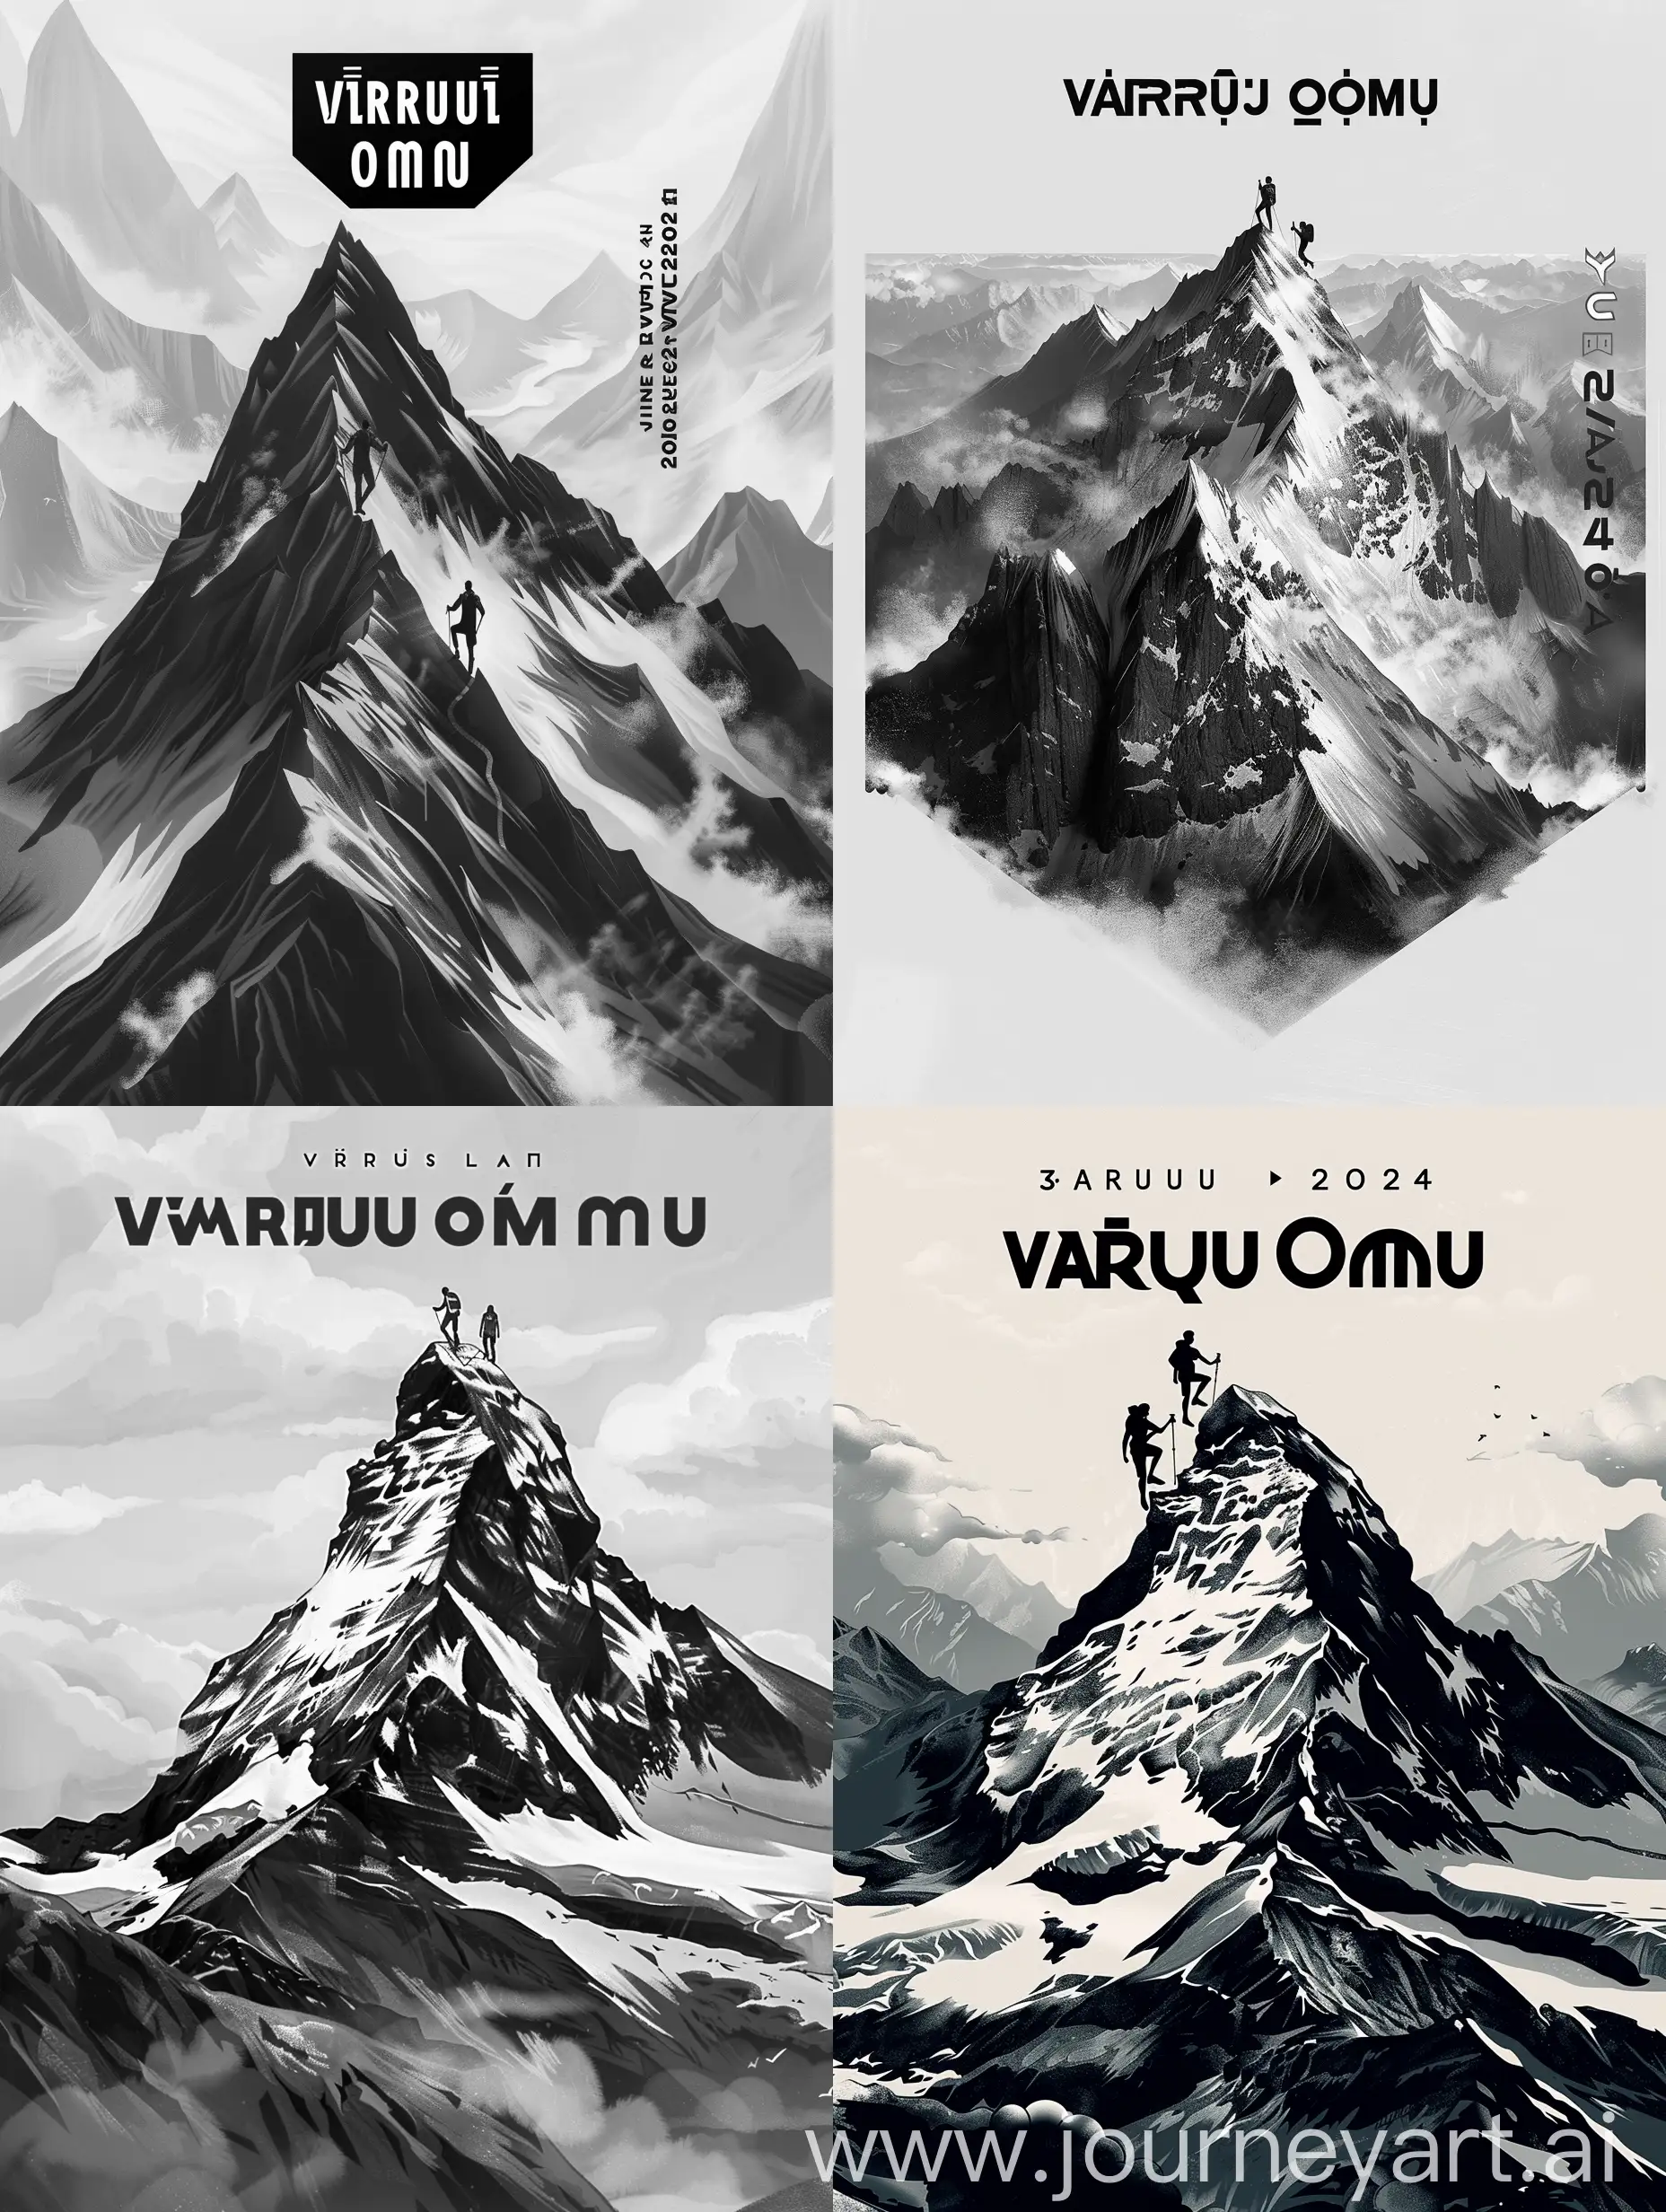 A black and white digital painting showcases a peak in the mountains, with two ascending hikers, a man and a woman, symbolizing adventure. Bold text reading "Vârful Omu " is positioned above the illustration, while the date "03.04.2024" is  placed on the right side below, creating compact design that evokes the spirit of exploration and discovery.